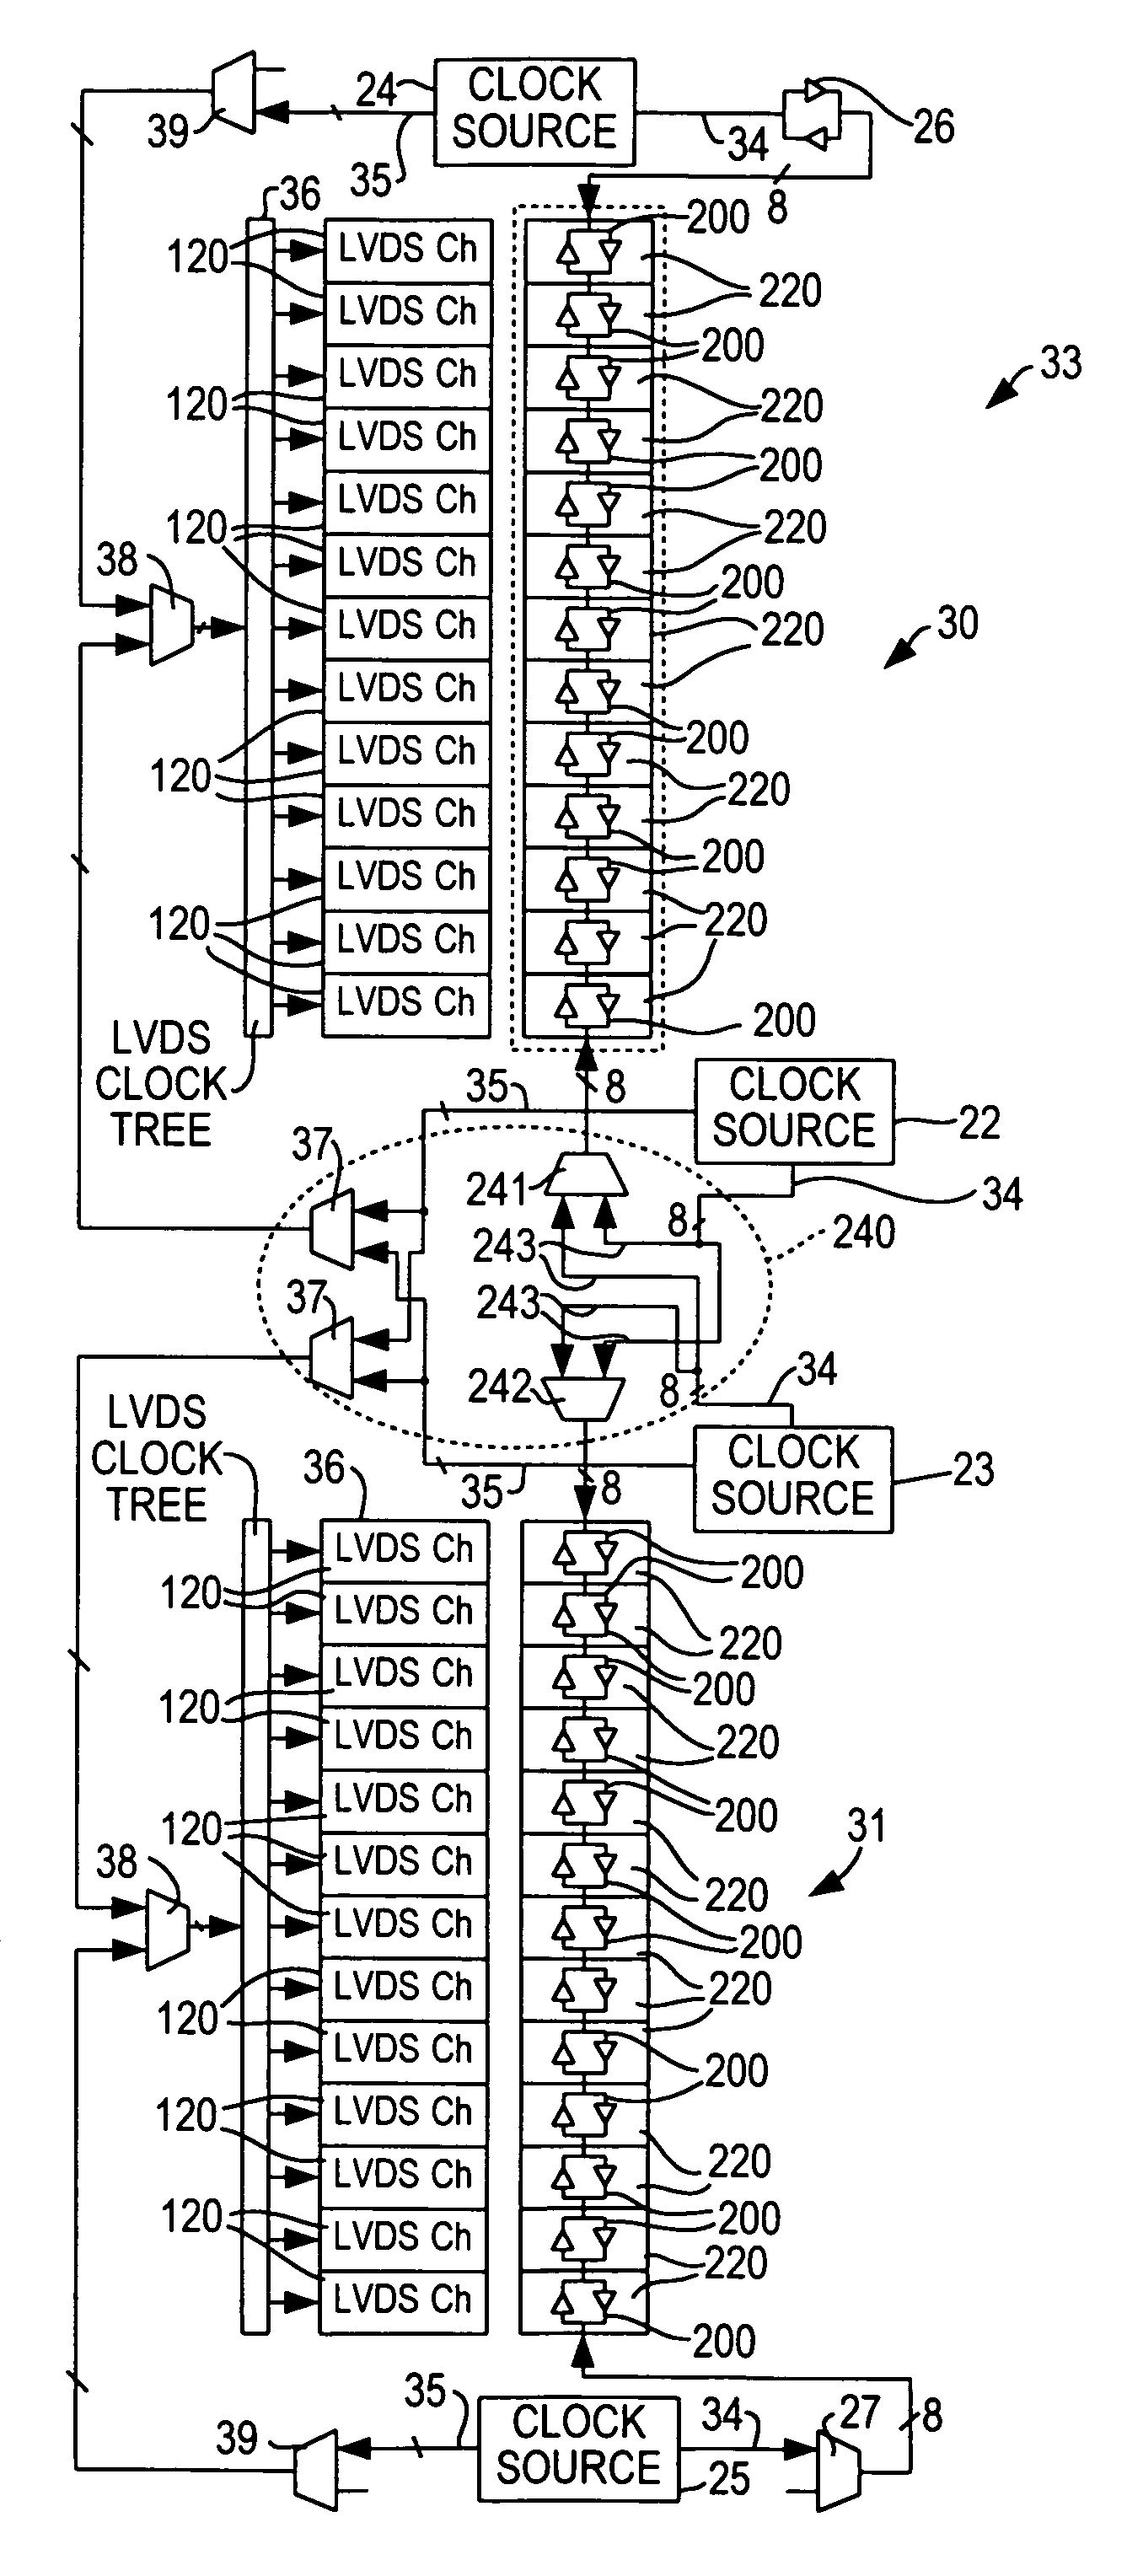 Configurable clock network for programmable logic device